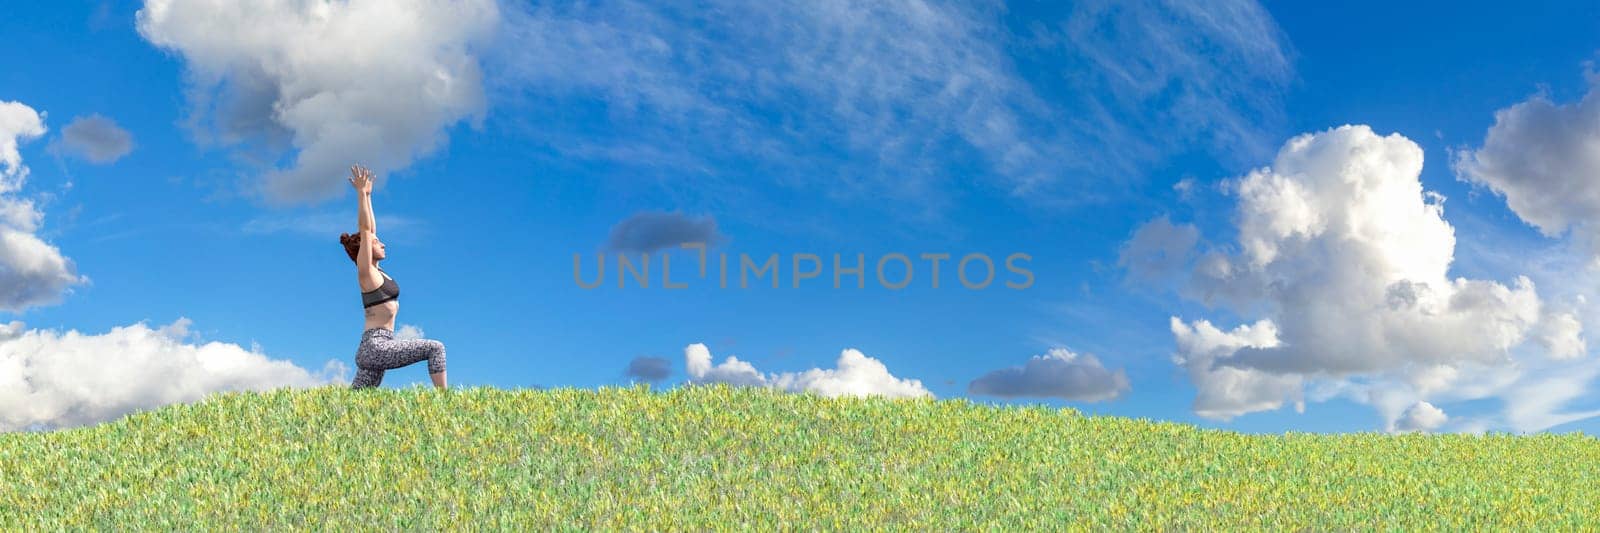 Harmony with Nature: Woman Practicing Yoga in Lush Green Field Under Blue Sky by Juanjo39